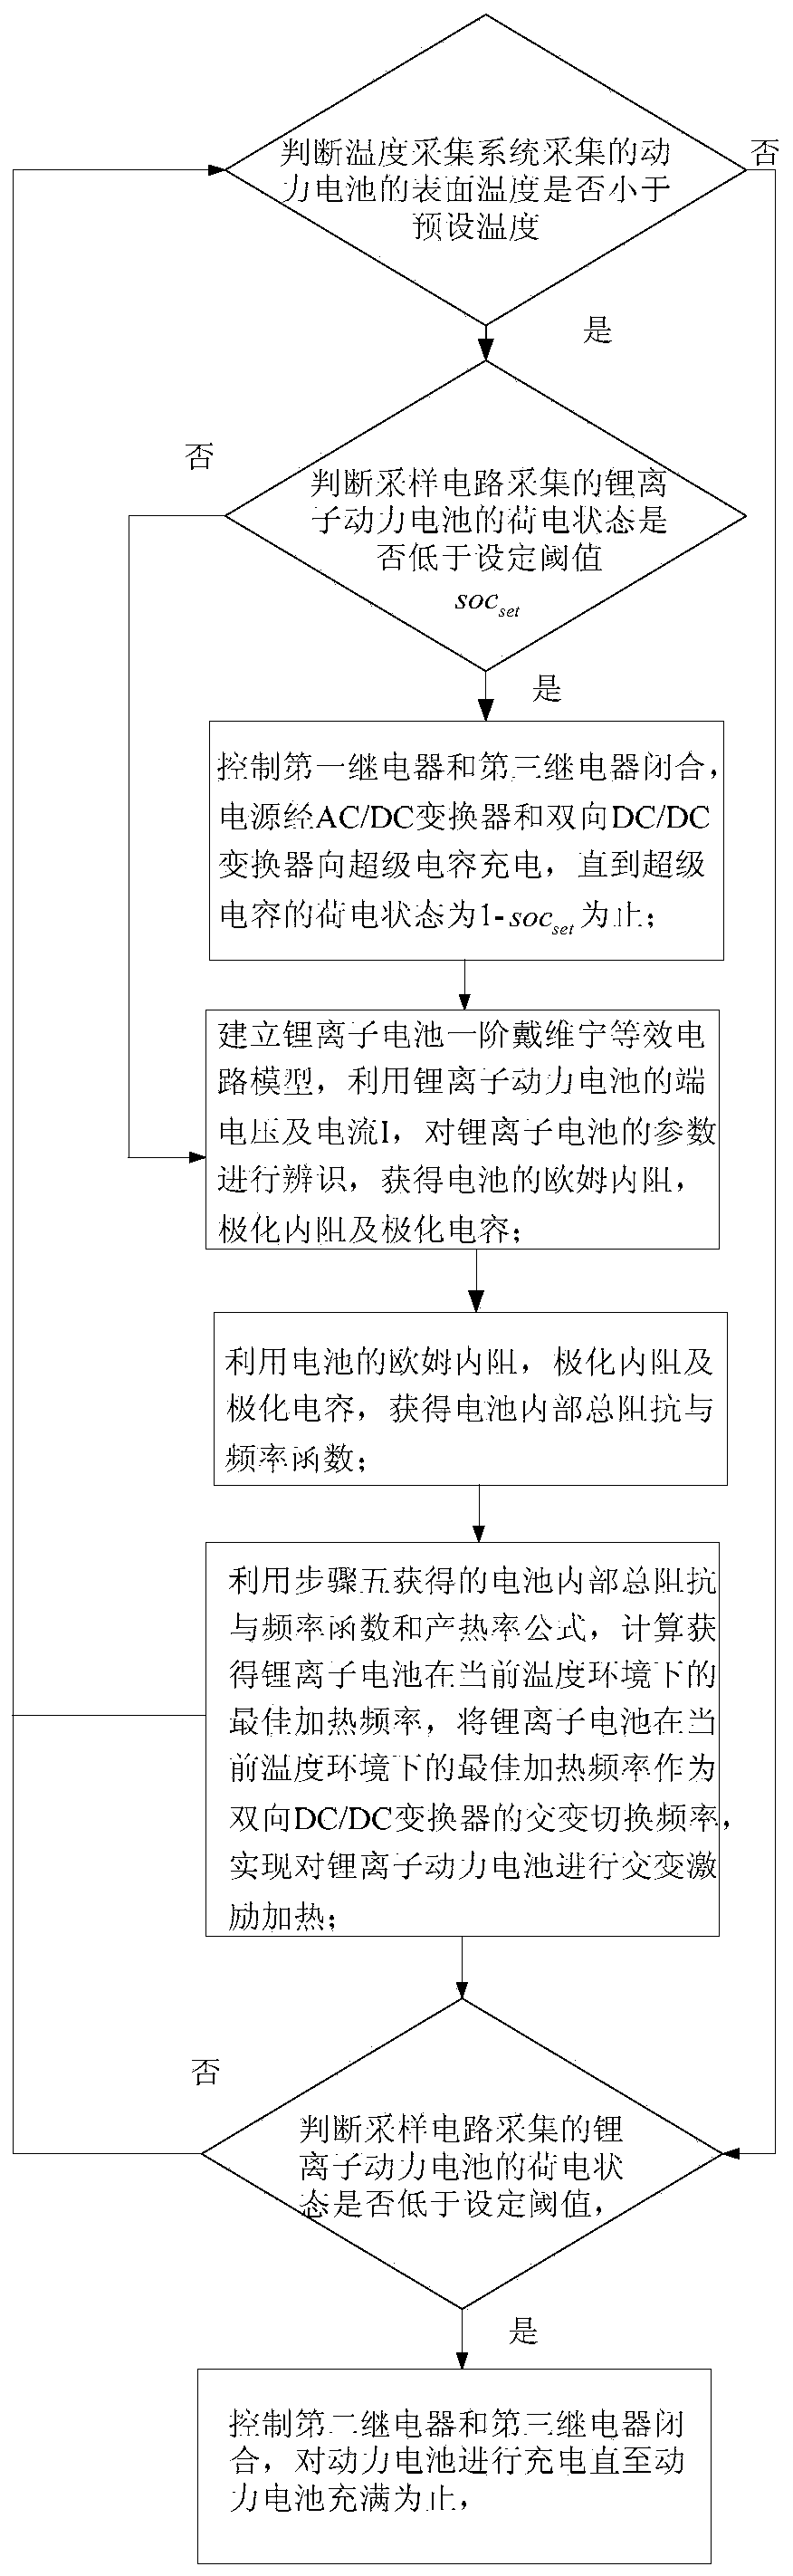 Charging/ heating control method for electric car power battery